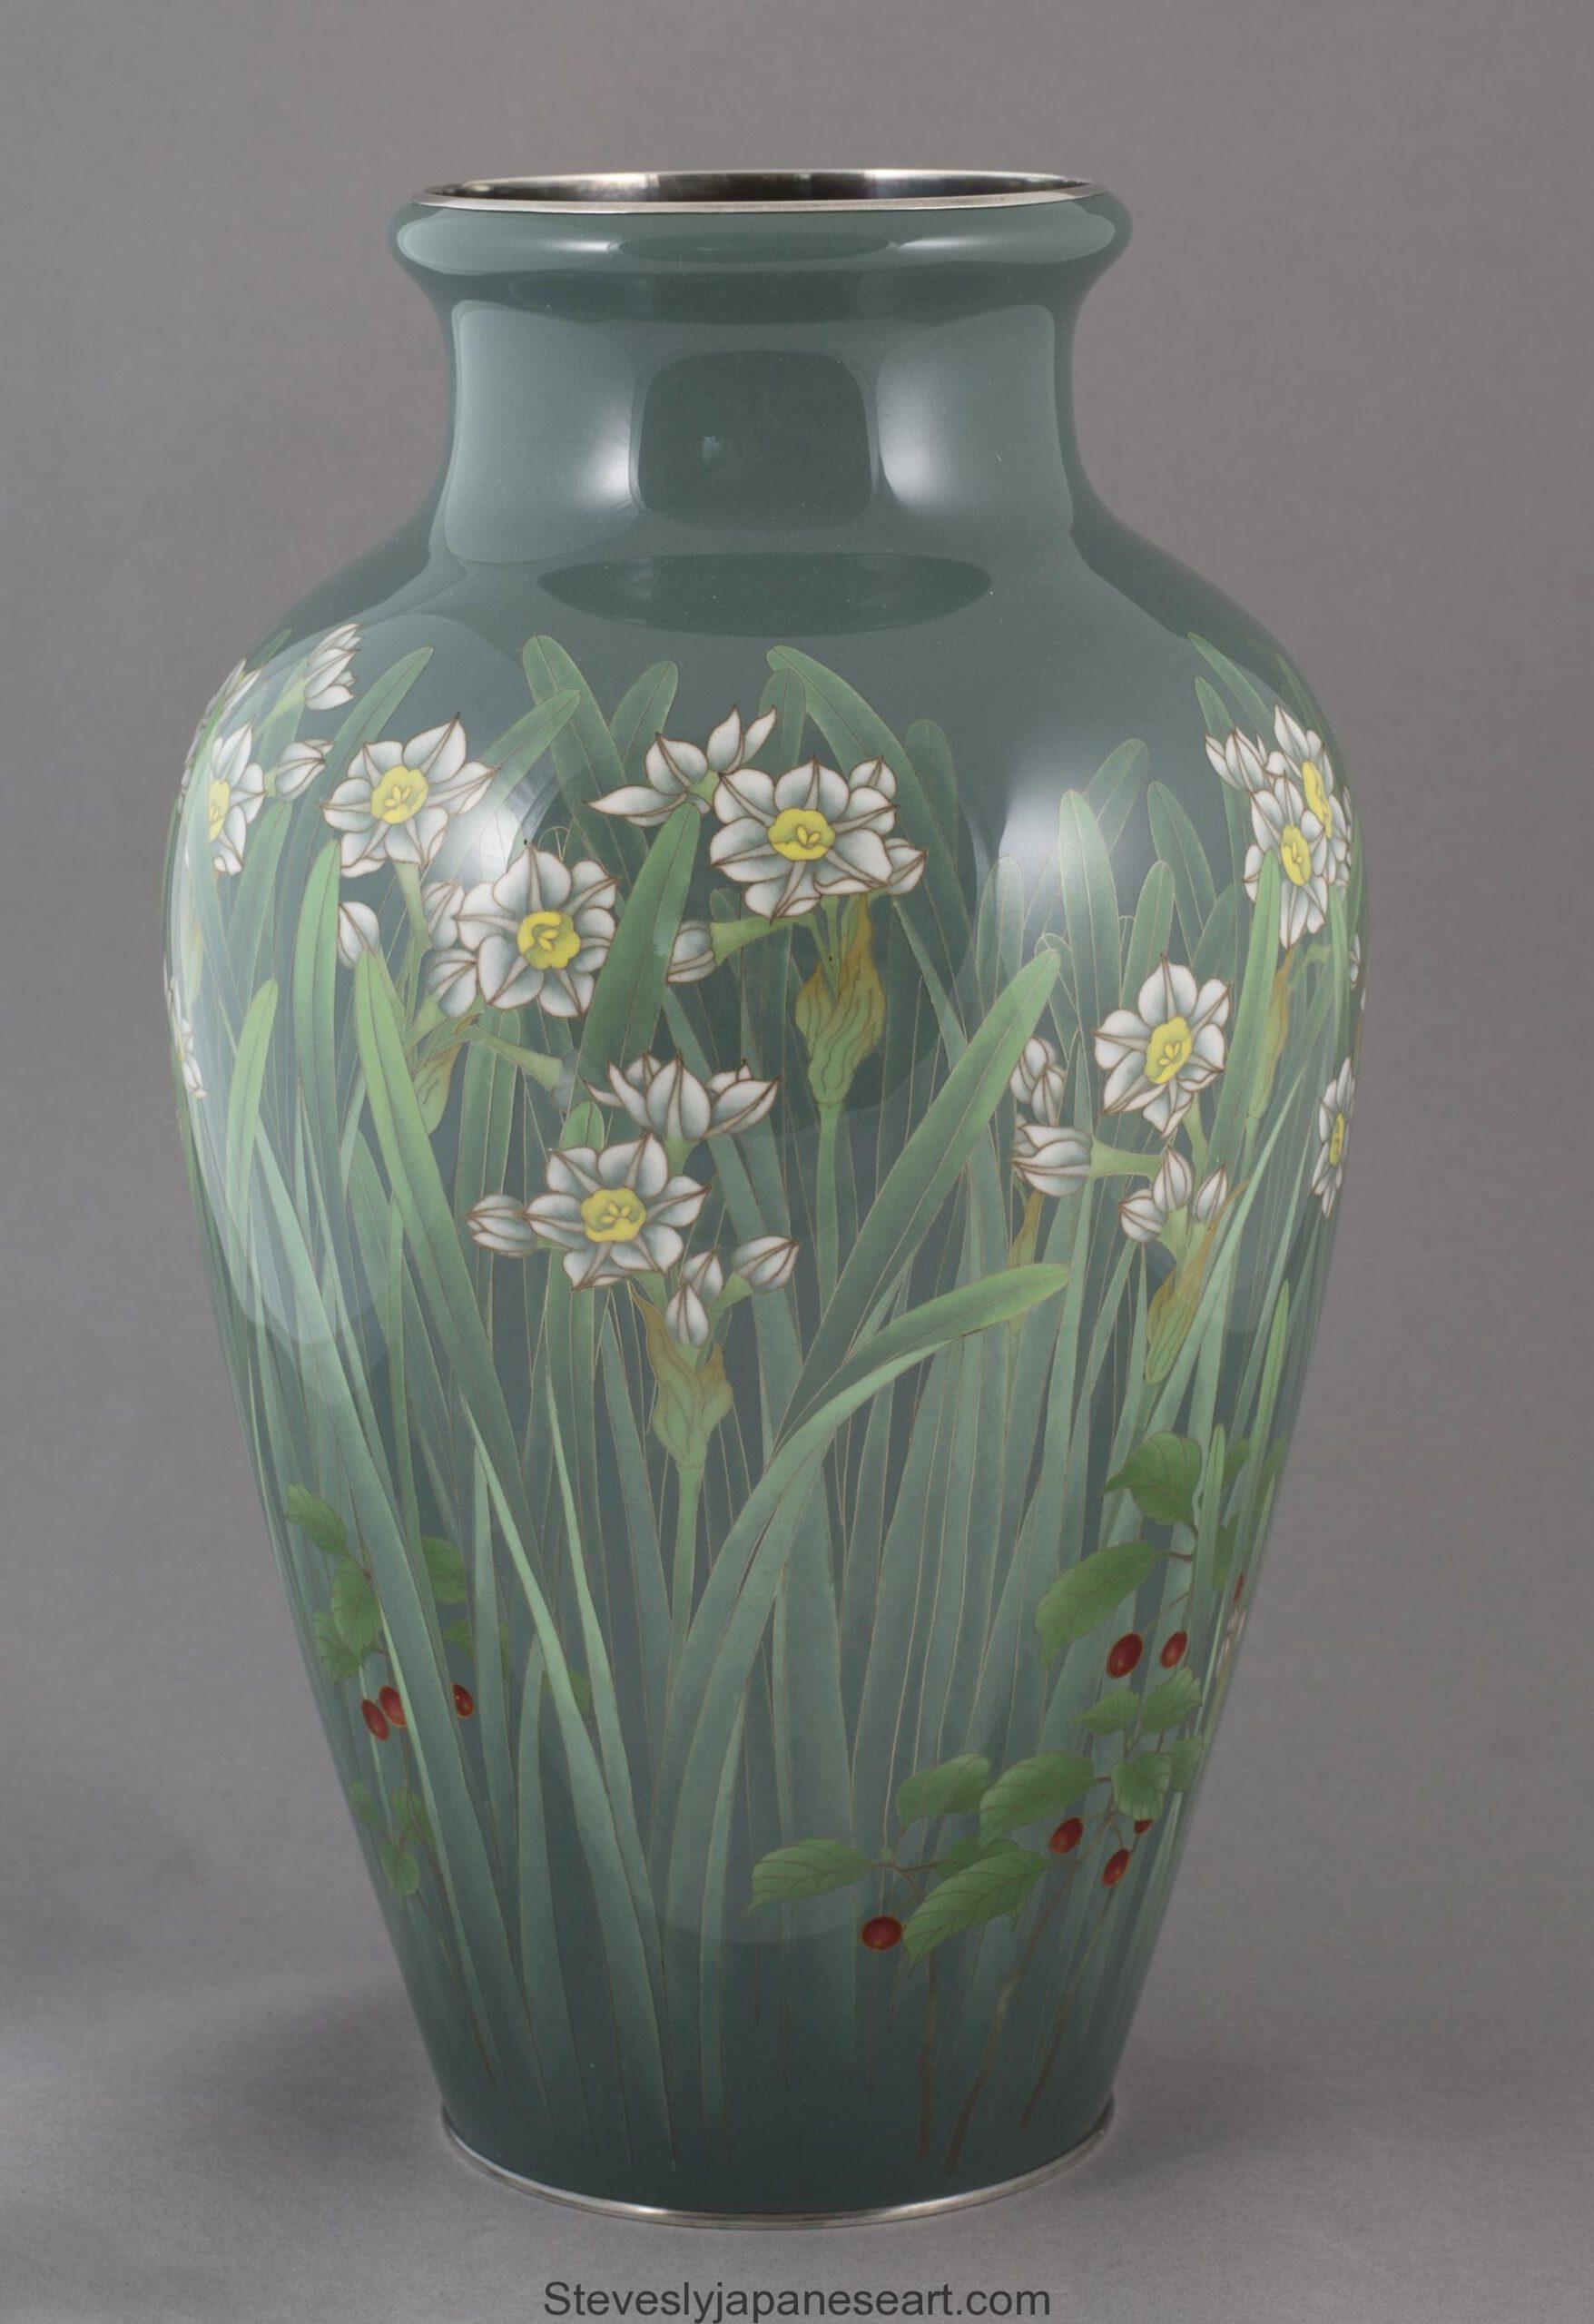 As part of our Japanese works of art collection we are delighted to offer this Japanese Meiji period (1869-1912) circa 1910, cloisonné enamel vase depicting narcissus flowers amidst Japanese red berry plants (probably Rubus Phoenicolasius) complete